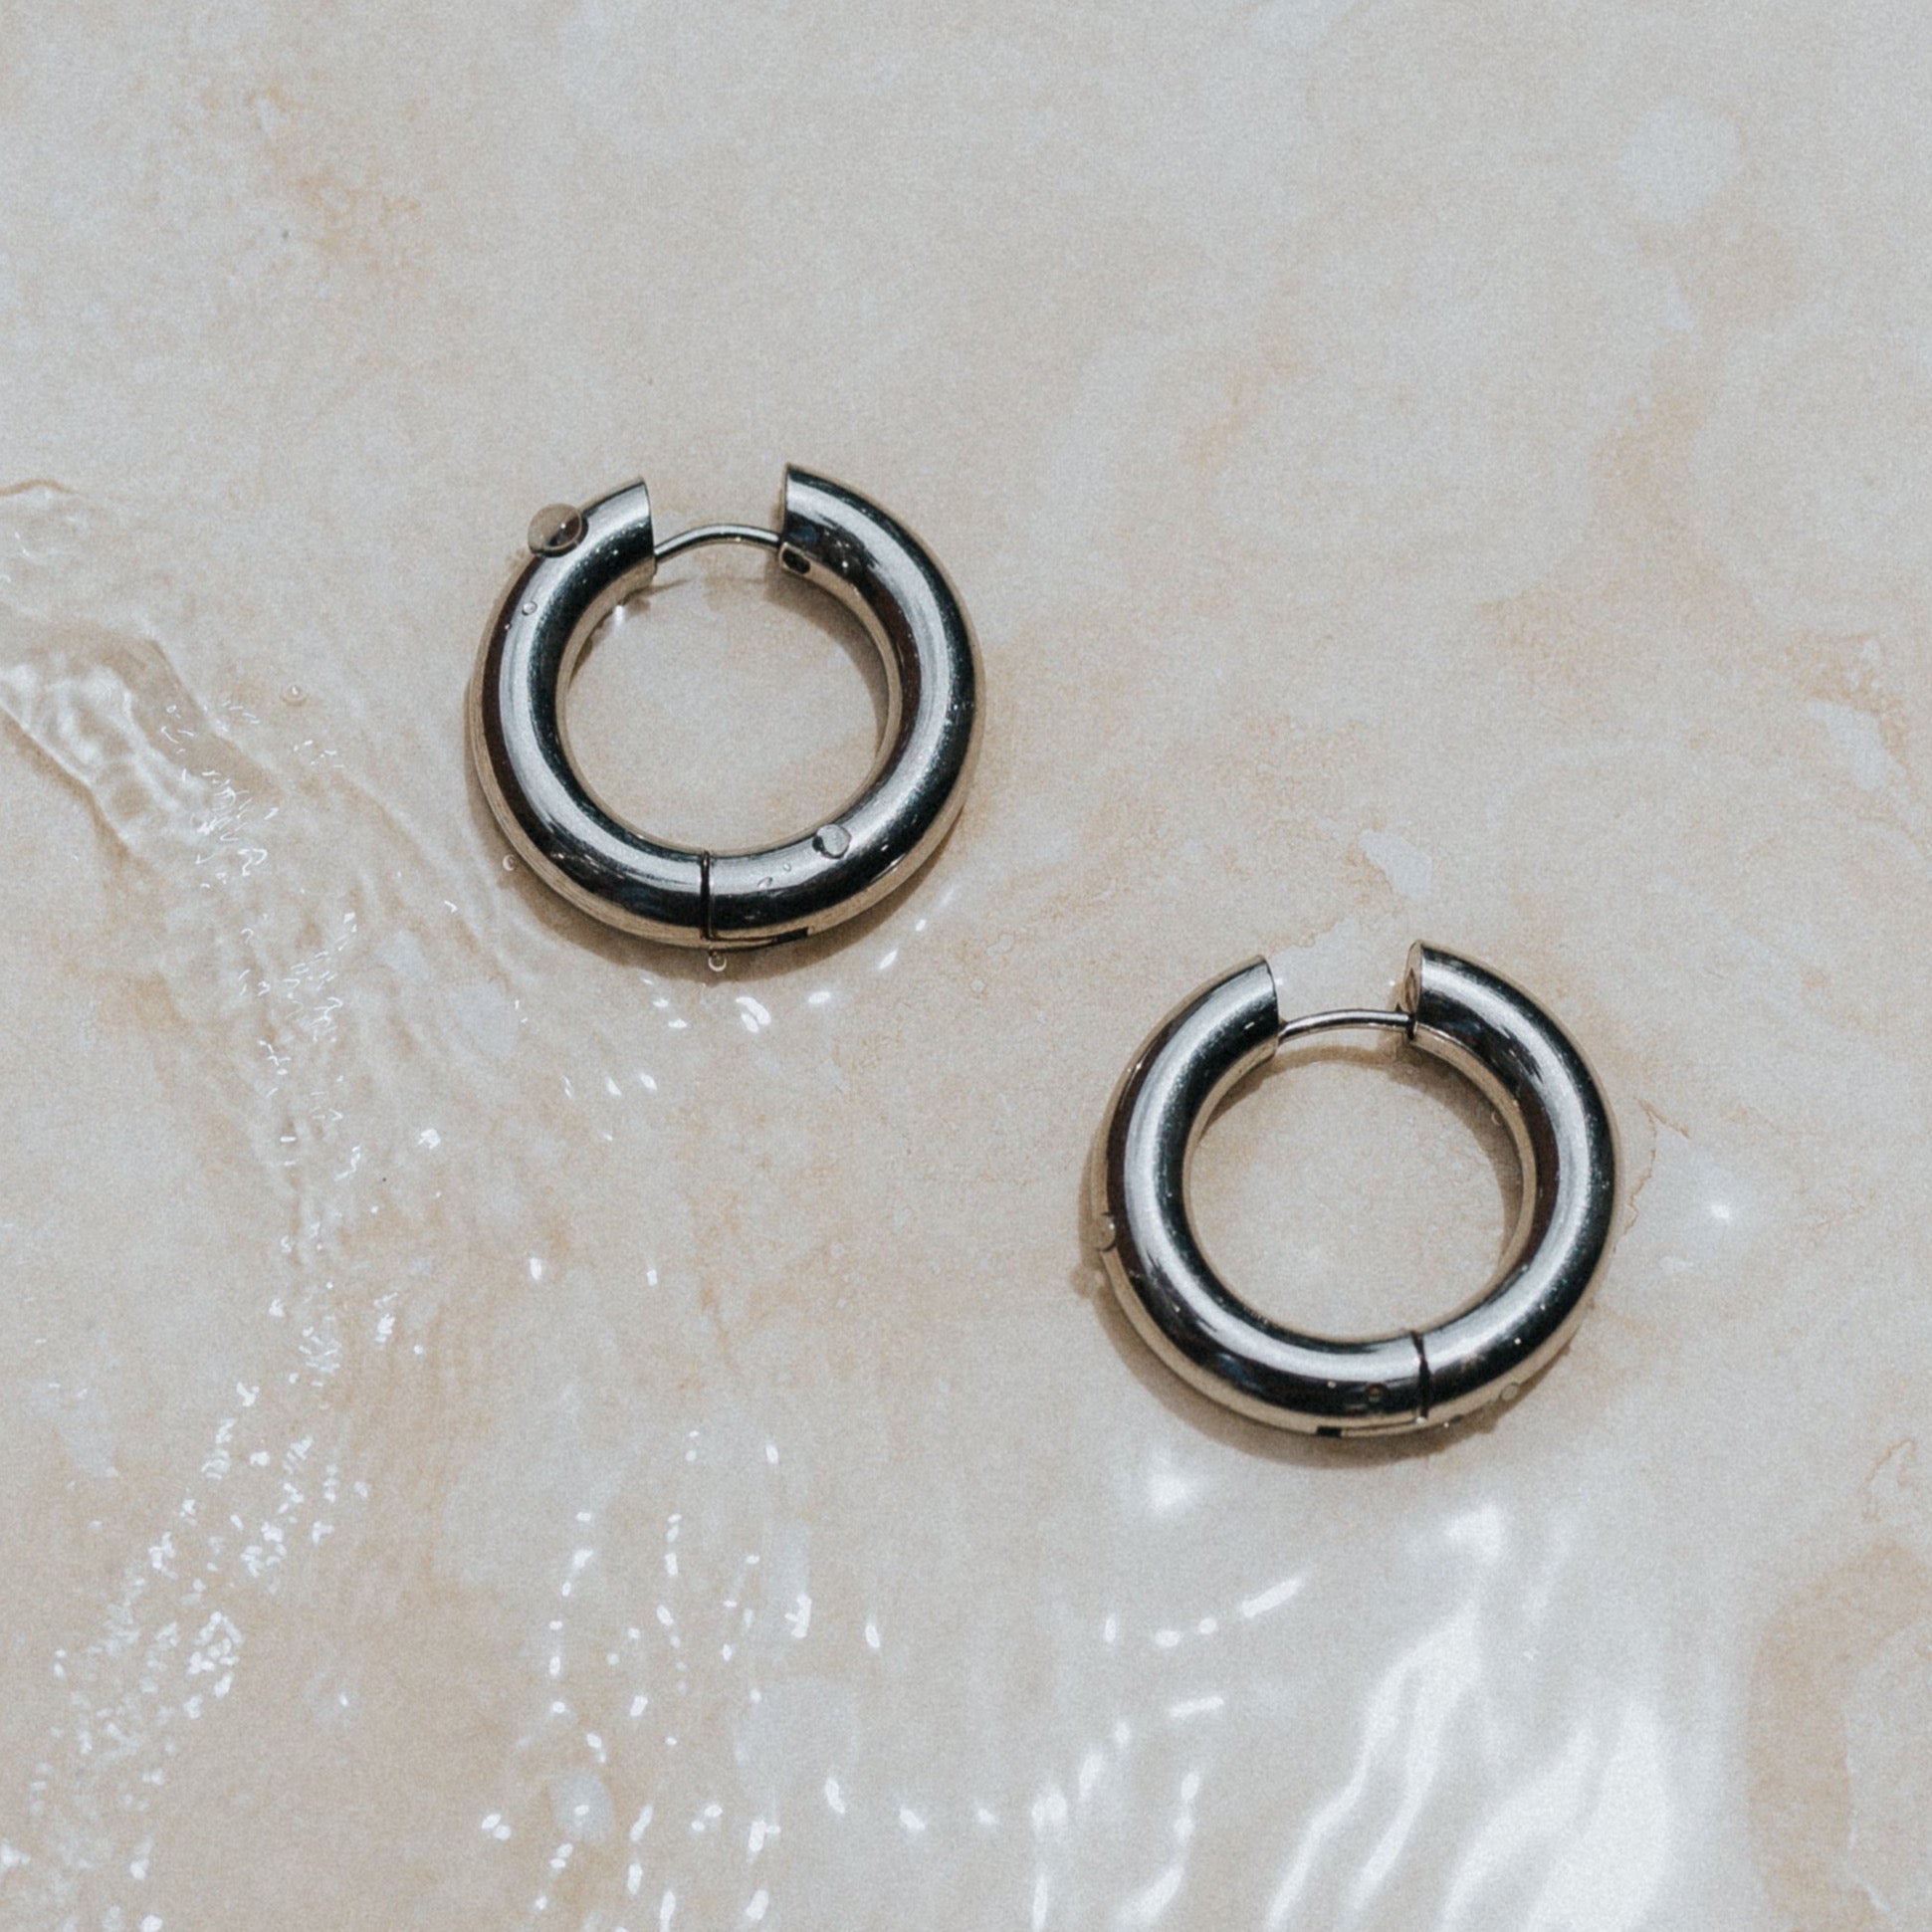 Stainless steel surf proof earrings by Lore of the Sea silver hoops